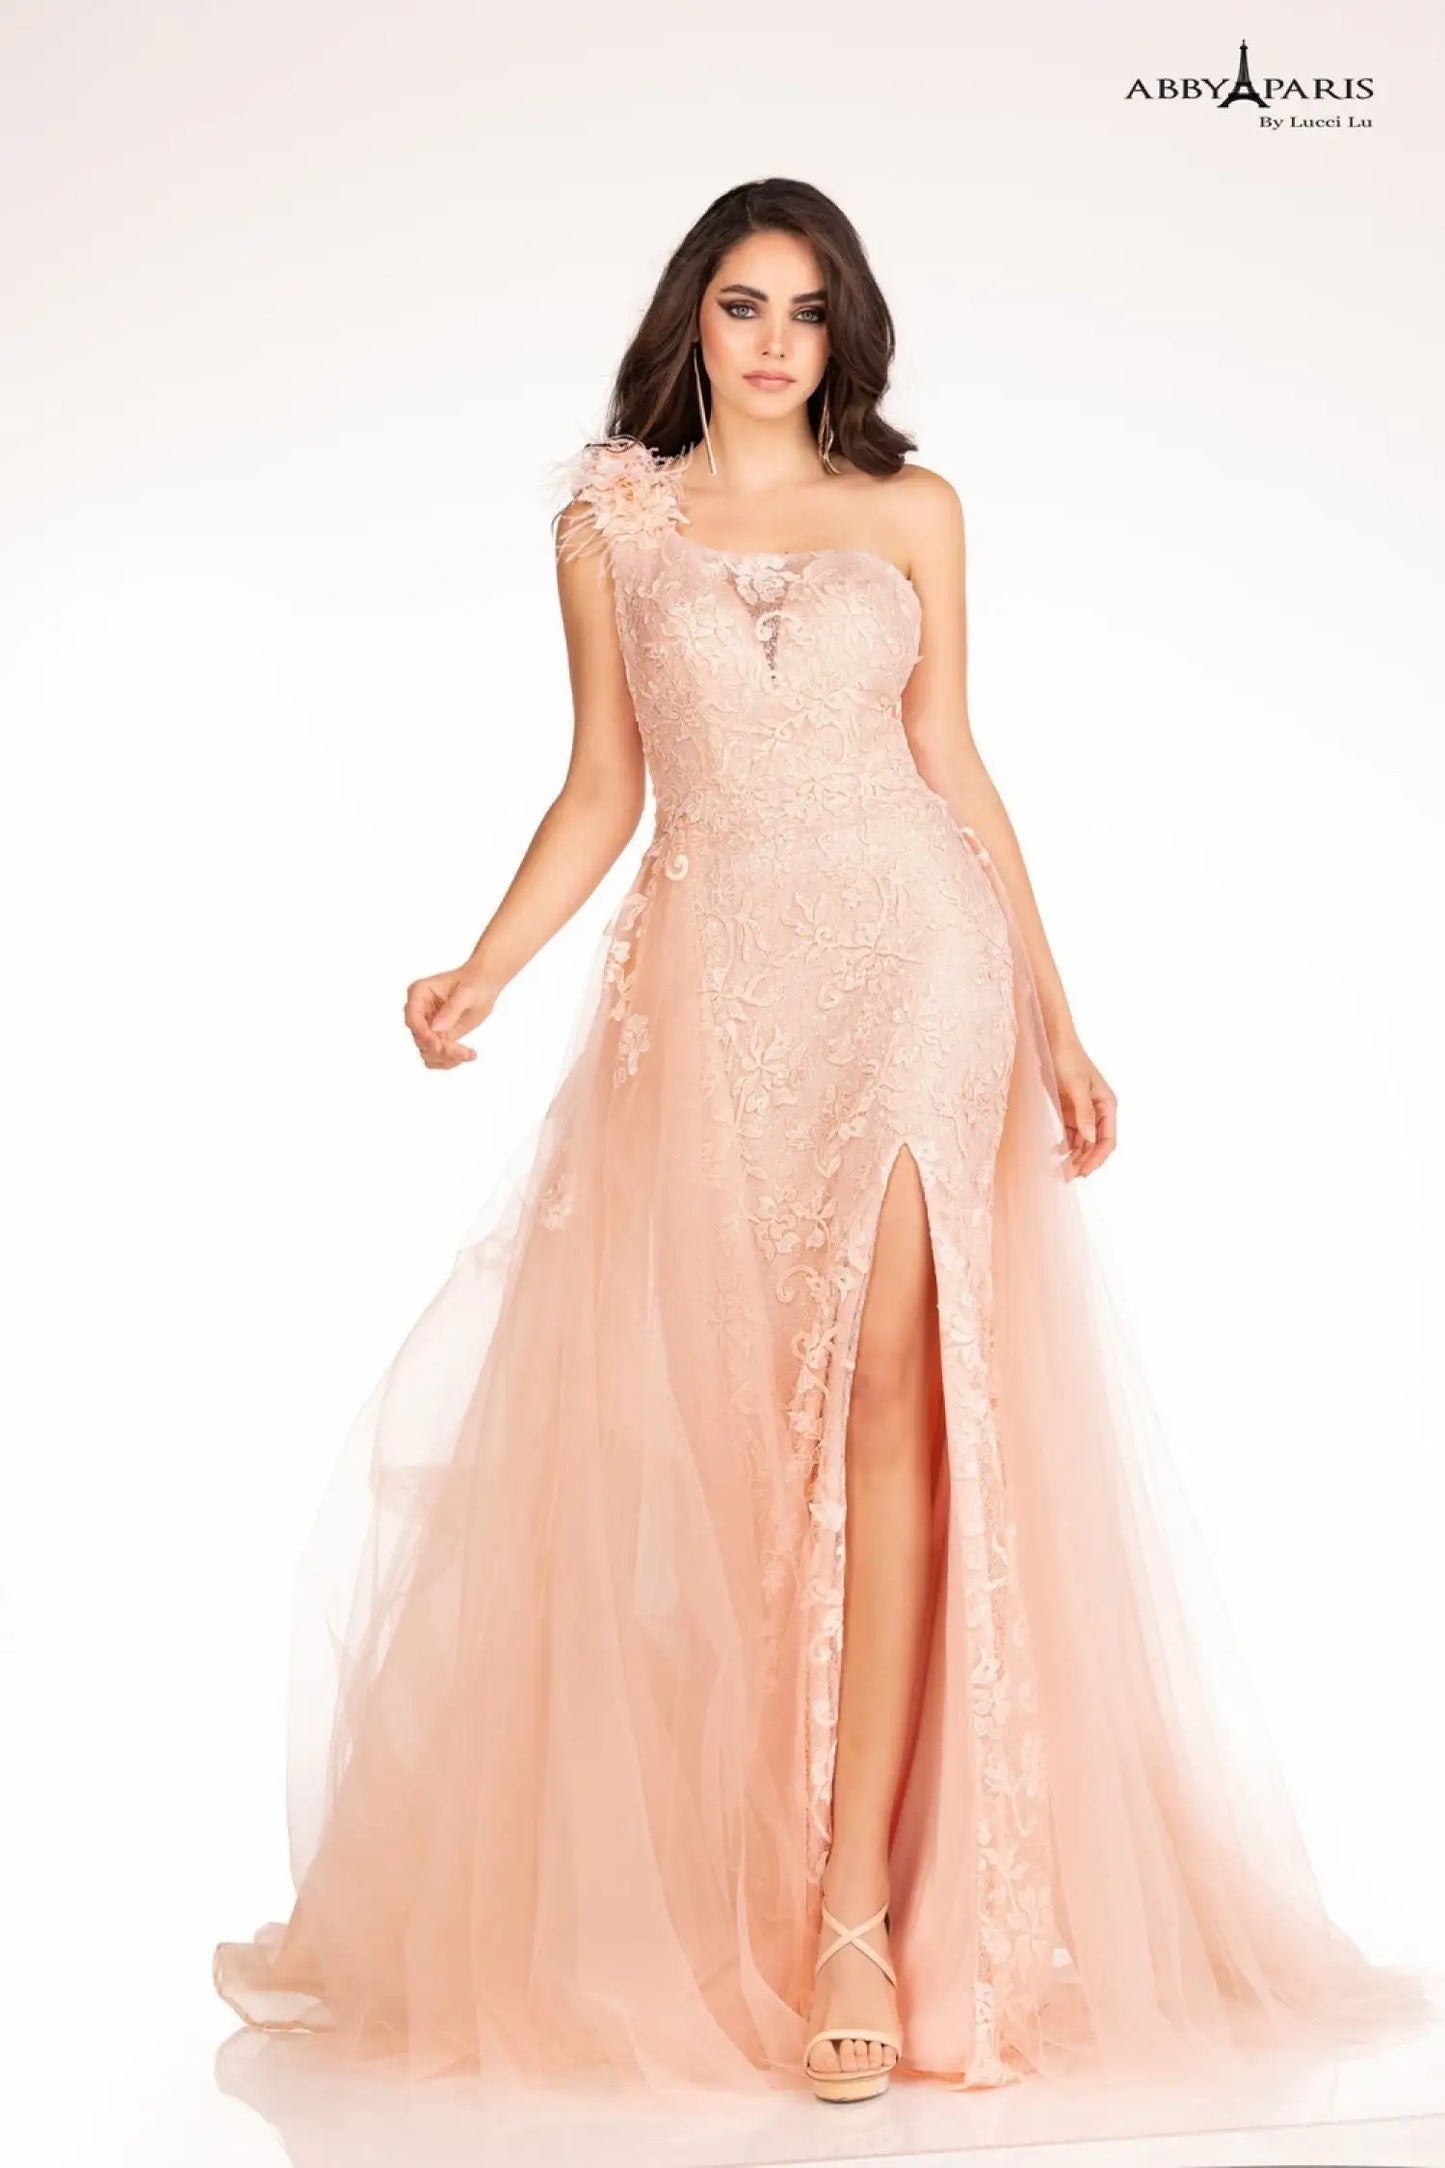 Abby Paris 90109 Evening Gown Size 6 Blush Long Fitted One Shoulder Feather 3d Floral Lace Dress Overskirt Pageant Gown